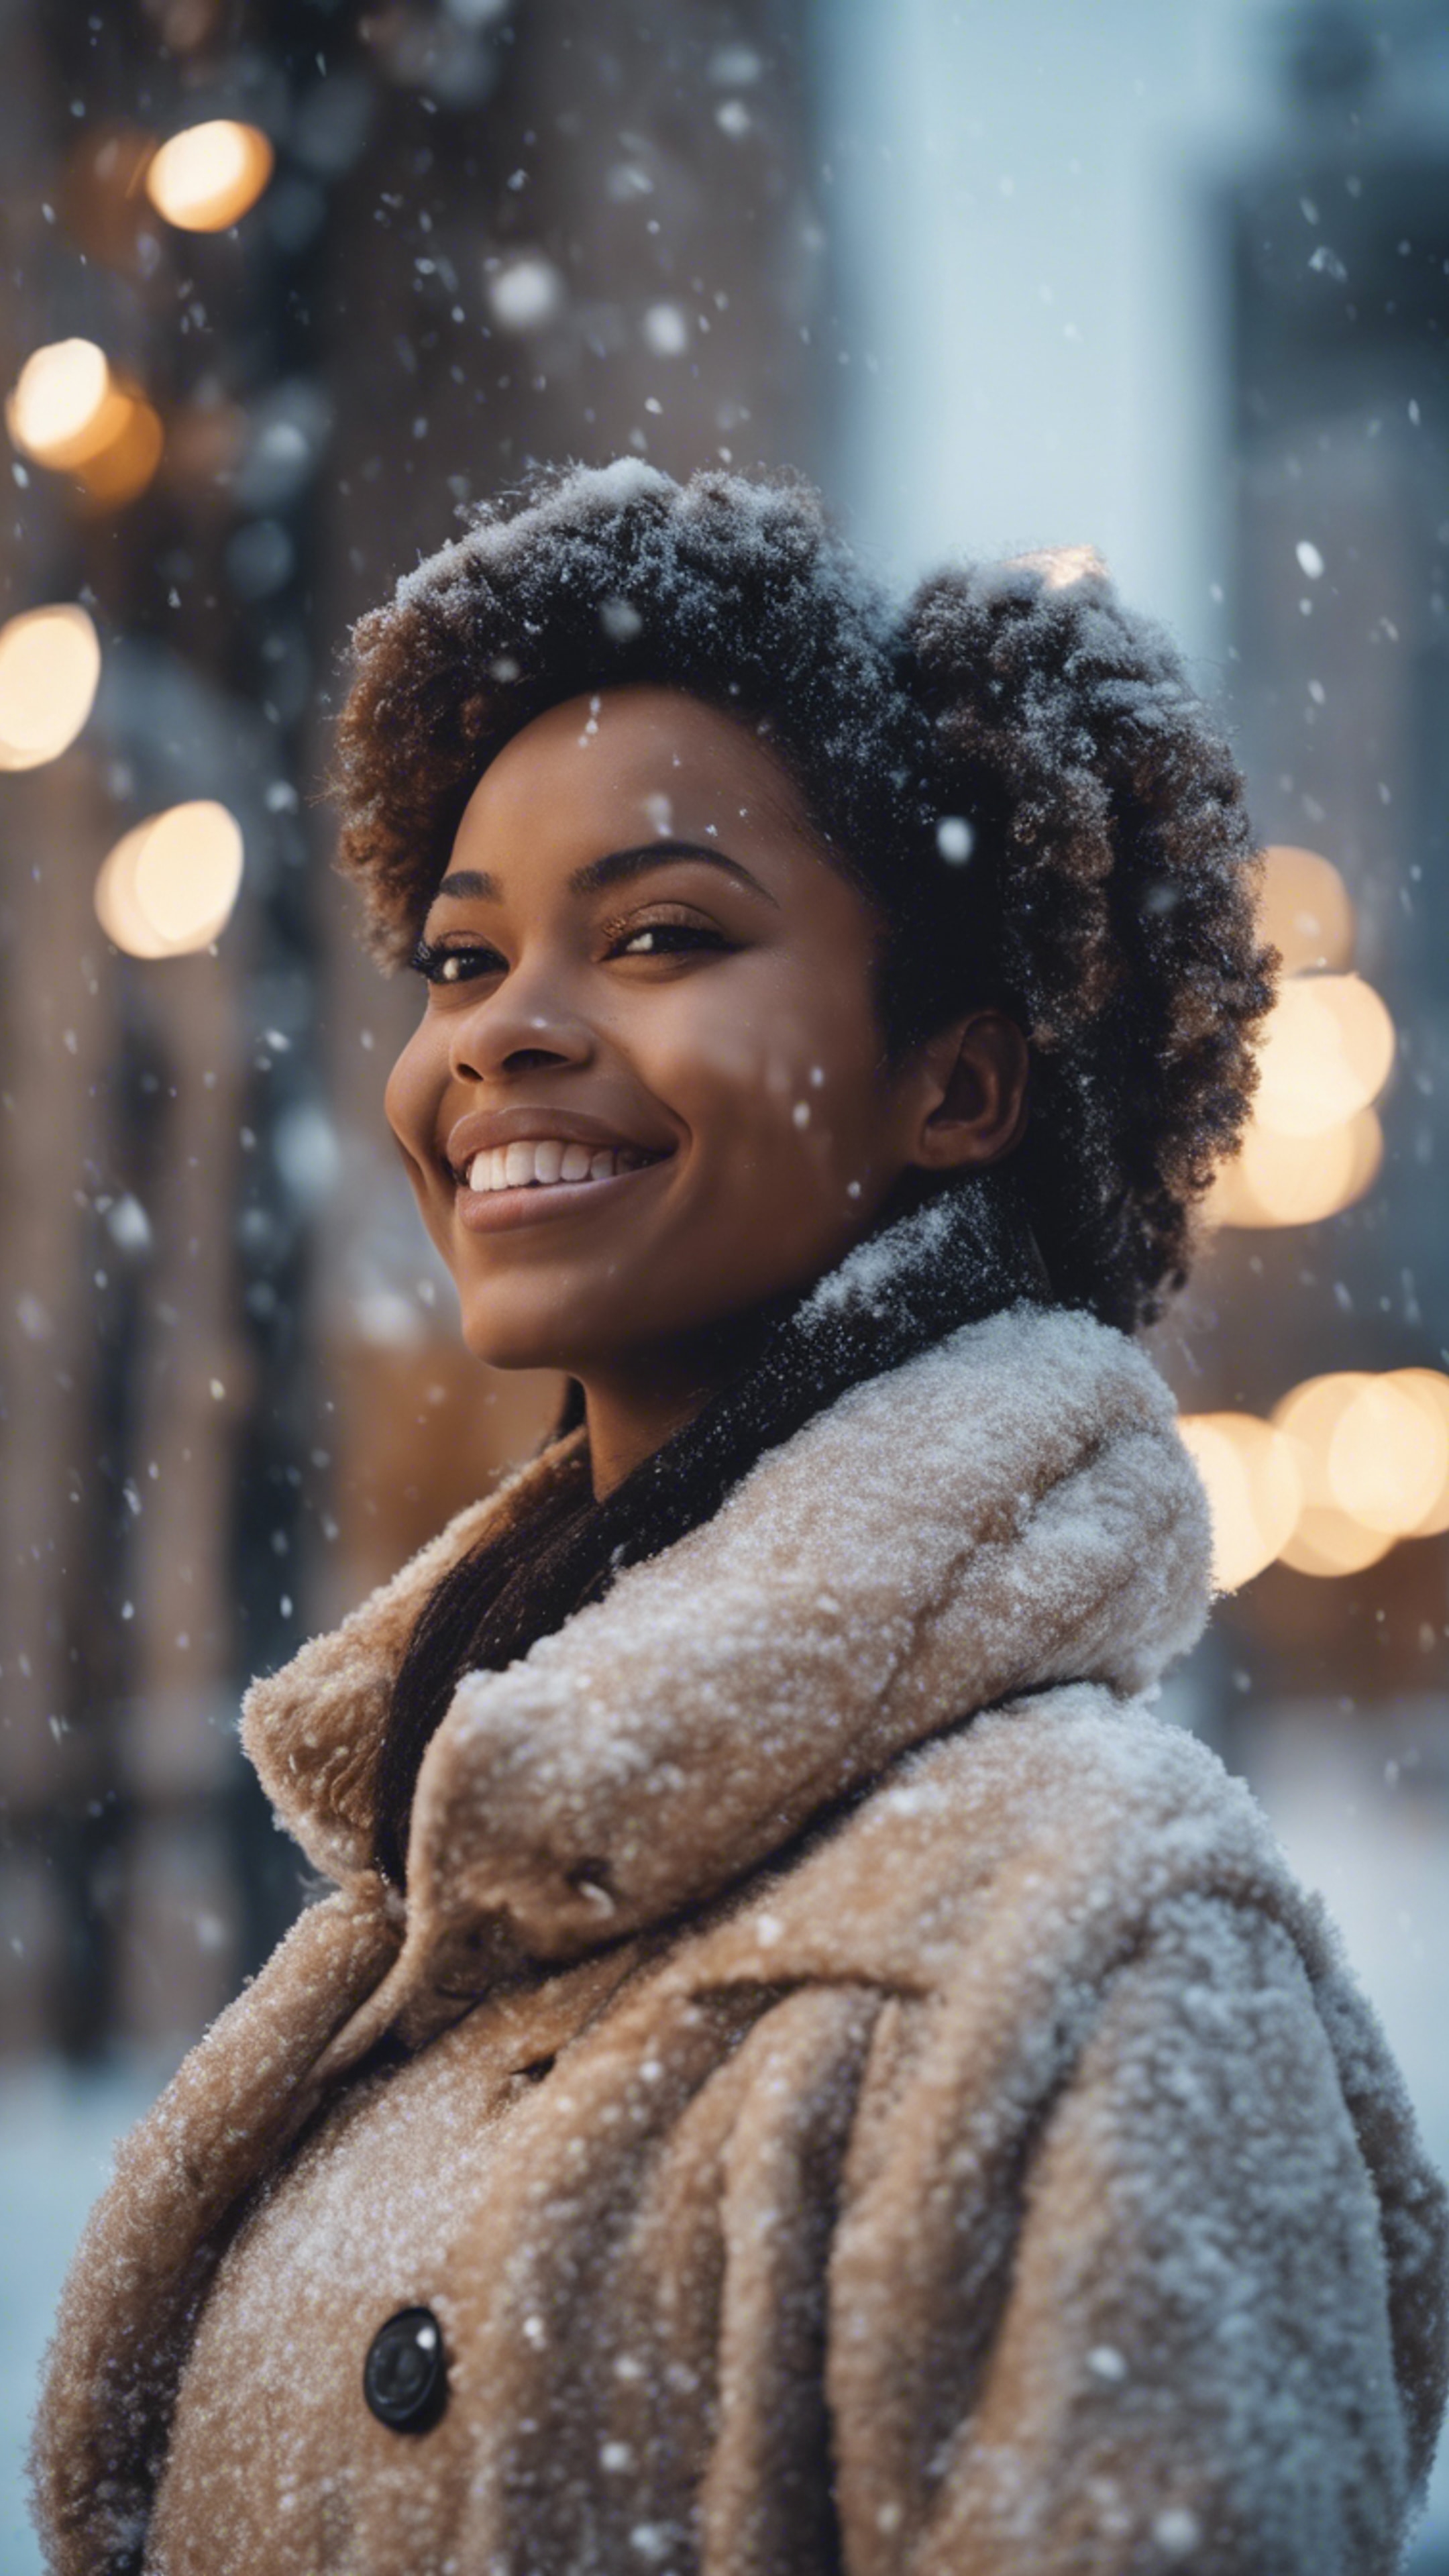 A beautiful black girl in a stylish winter coat, her warm smile glowing against the snowy city backdrop.壁紙[cd91f58d07824077a874]